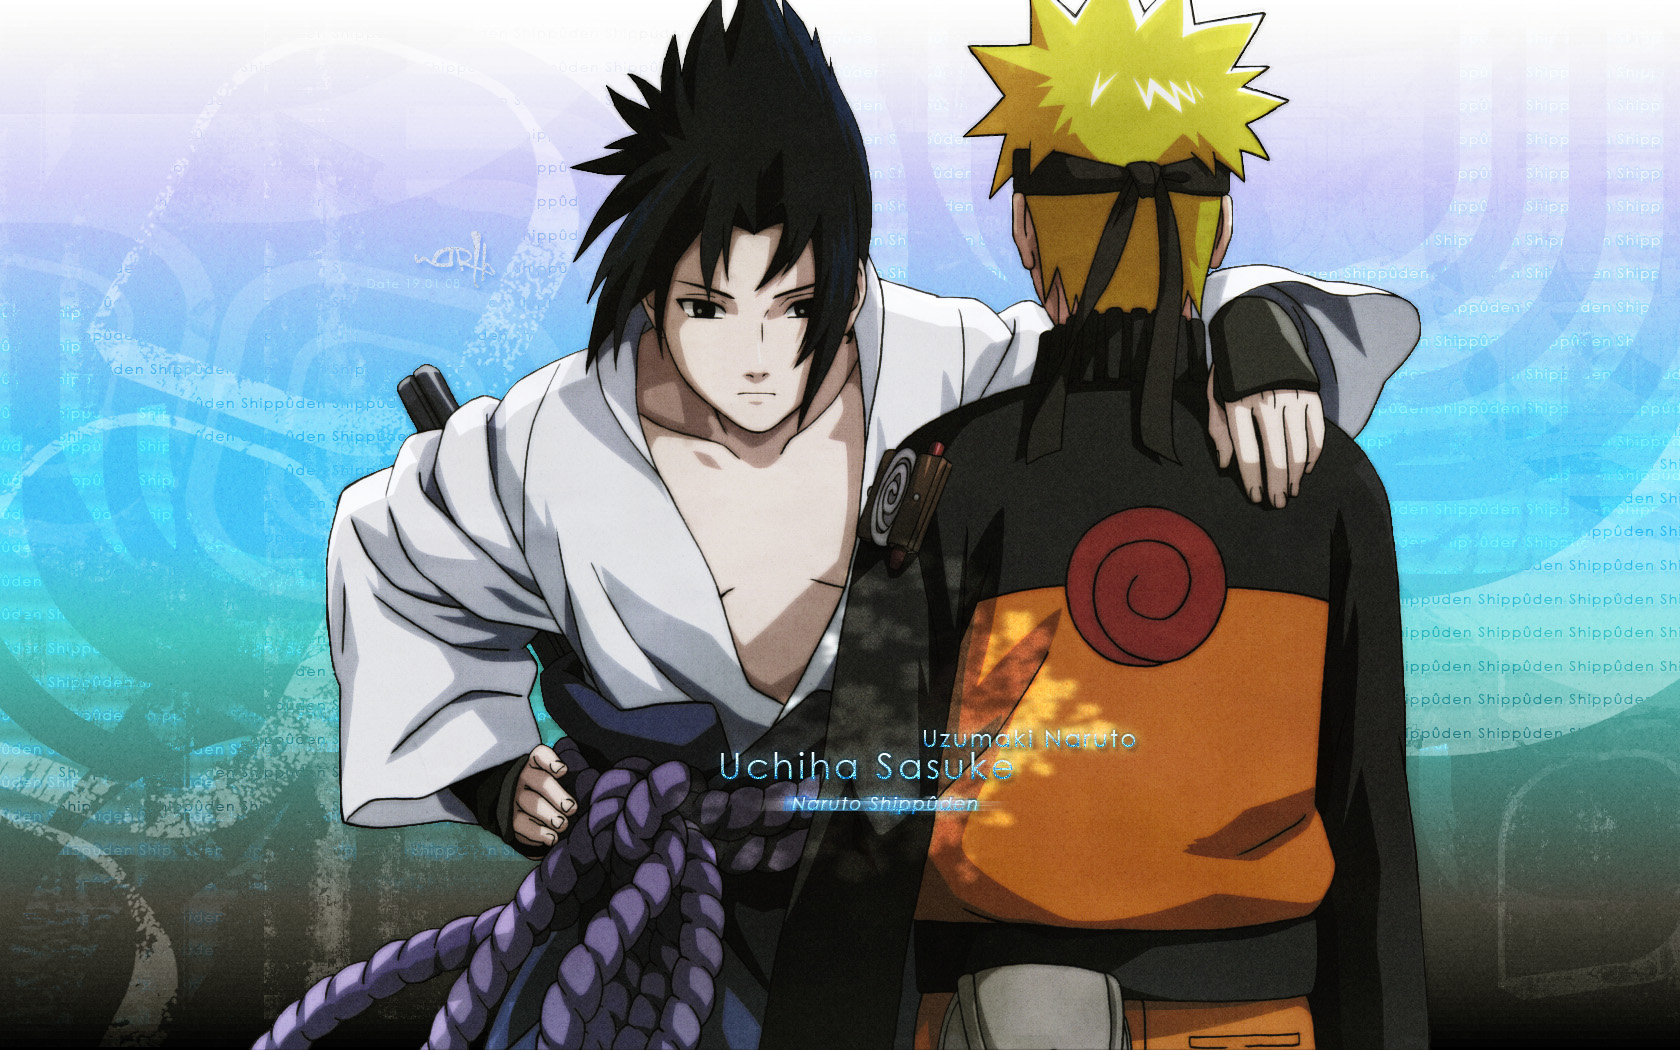 Naruto and Sasuke facing each other in a dynamic pose with vibrant colors.